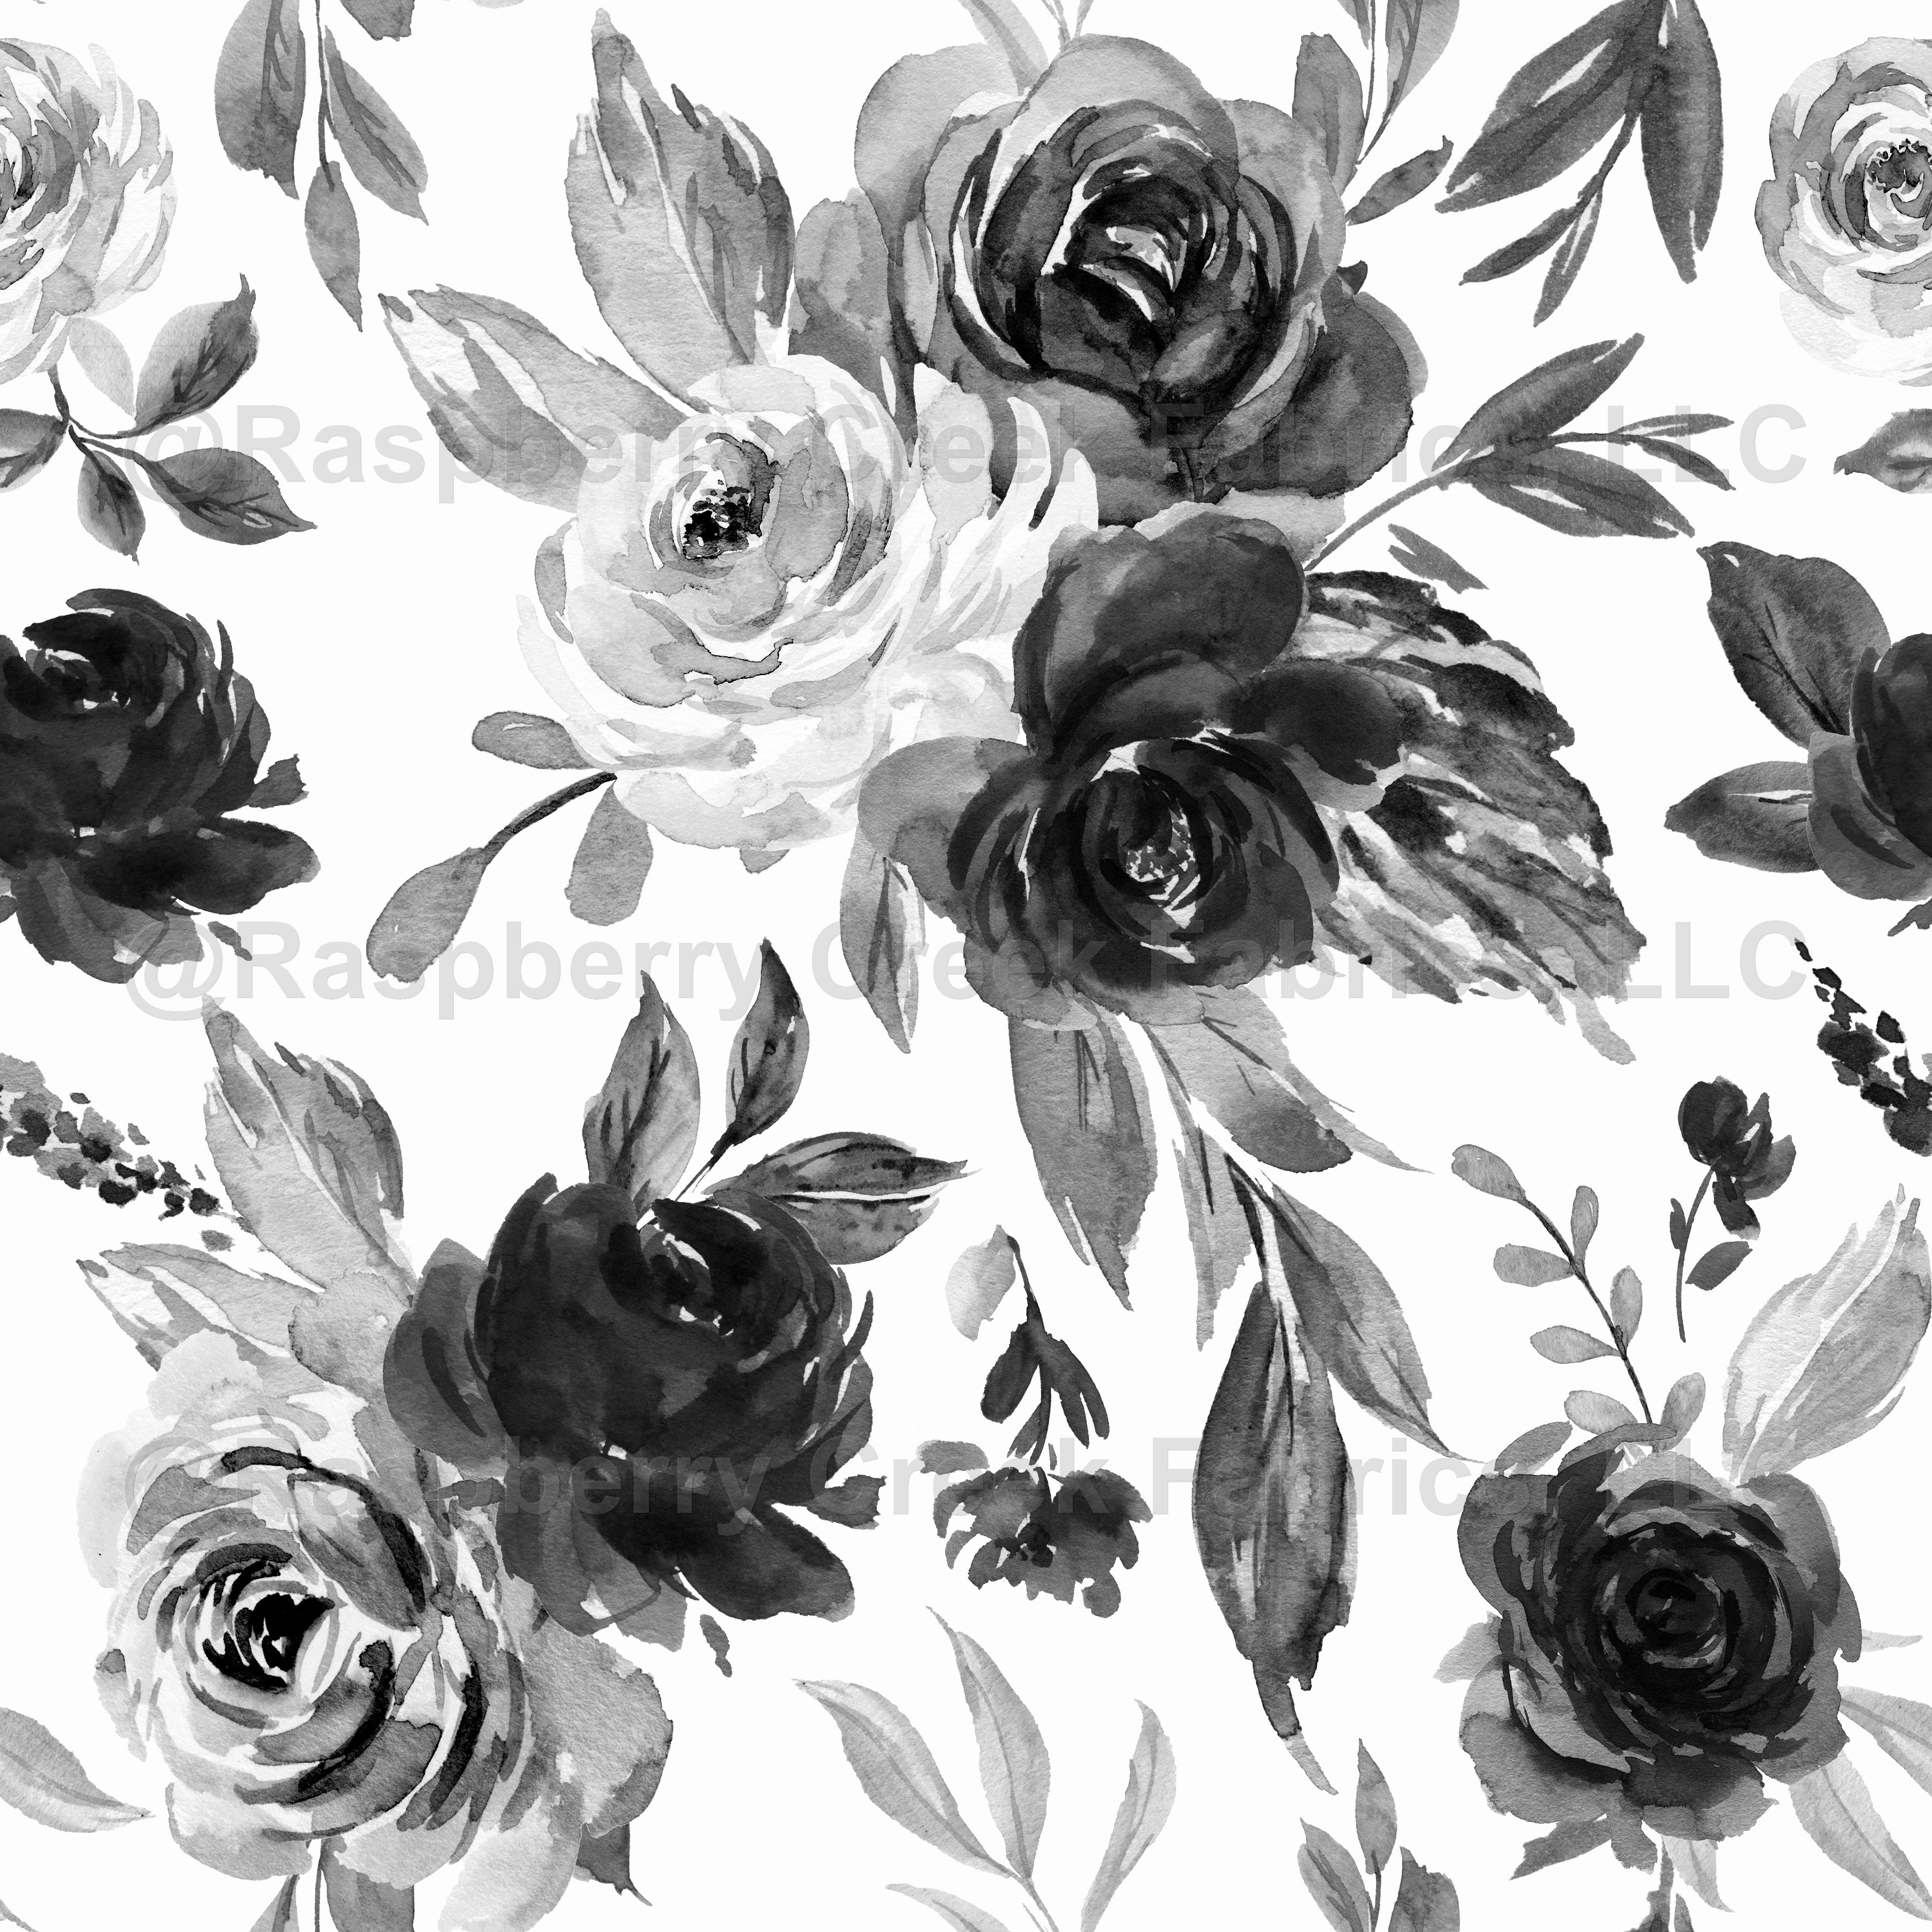 Black and white floral Fabric, Raspberry Creek Fabrics, watermarked